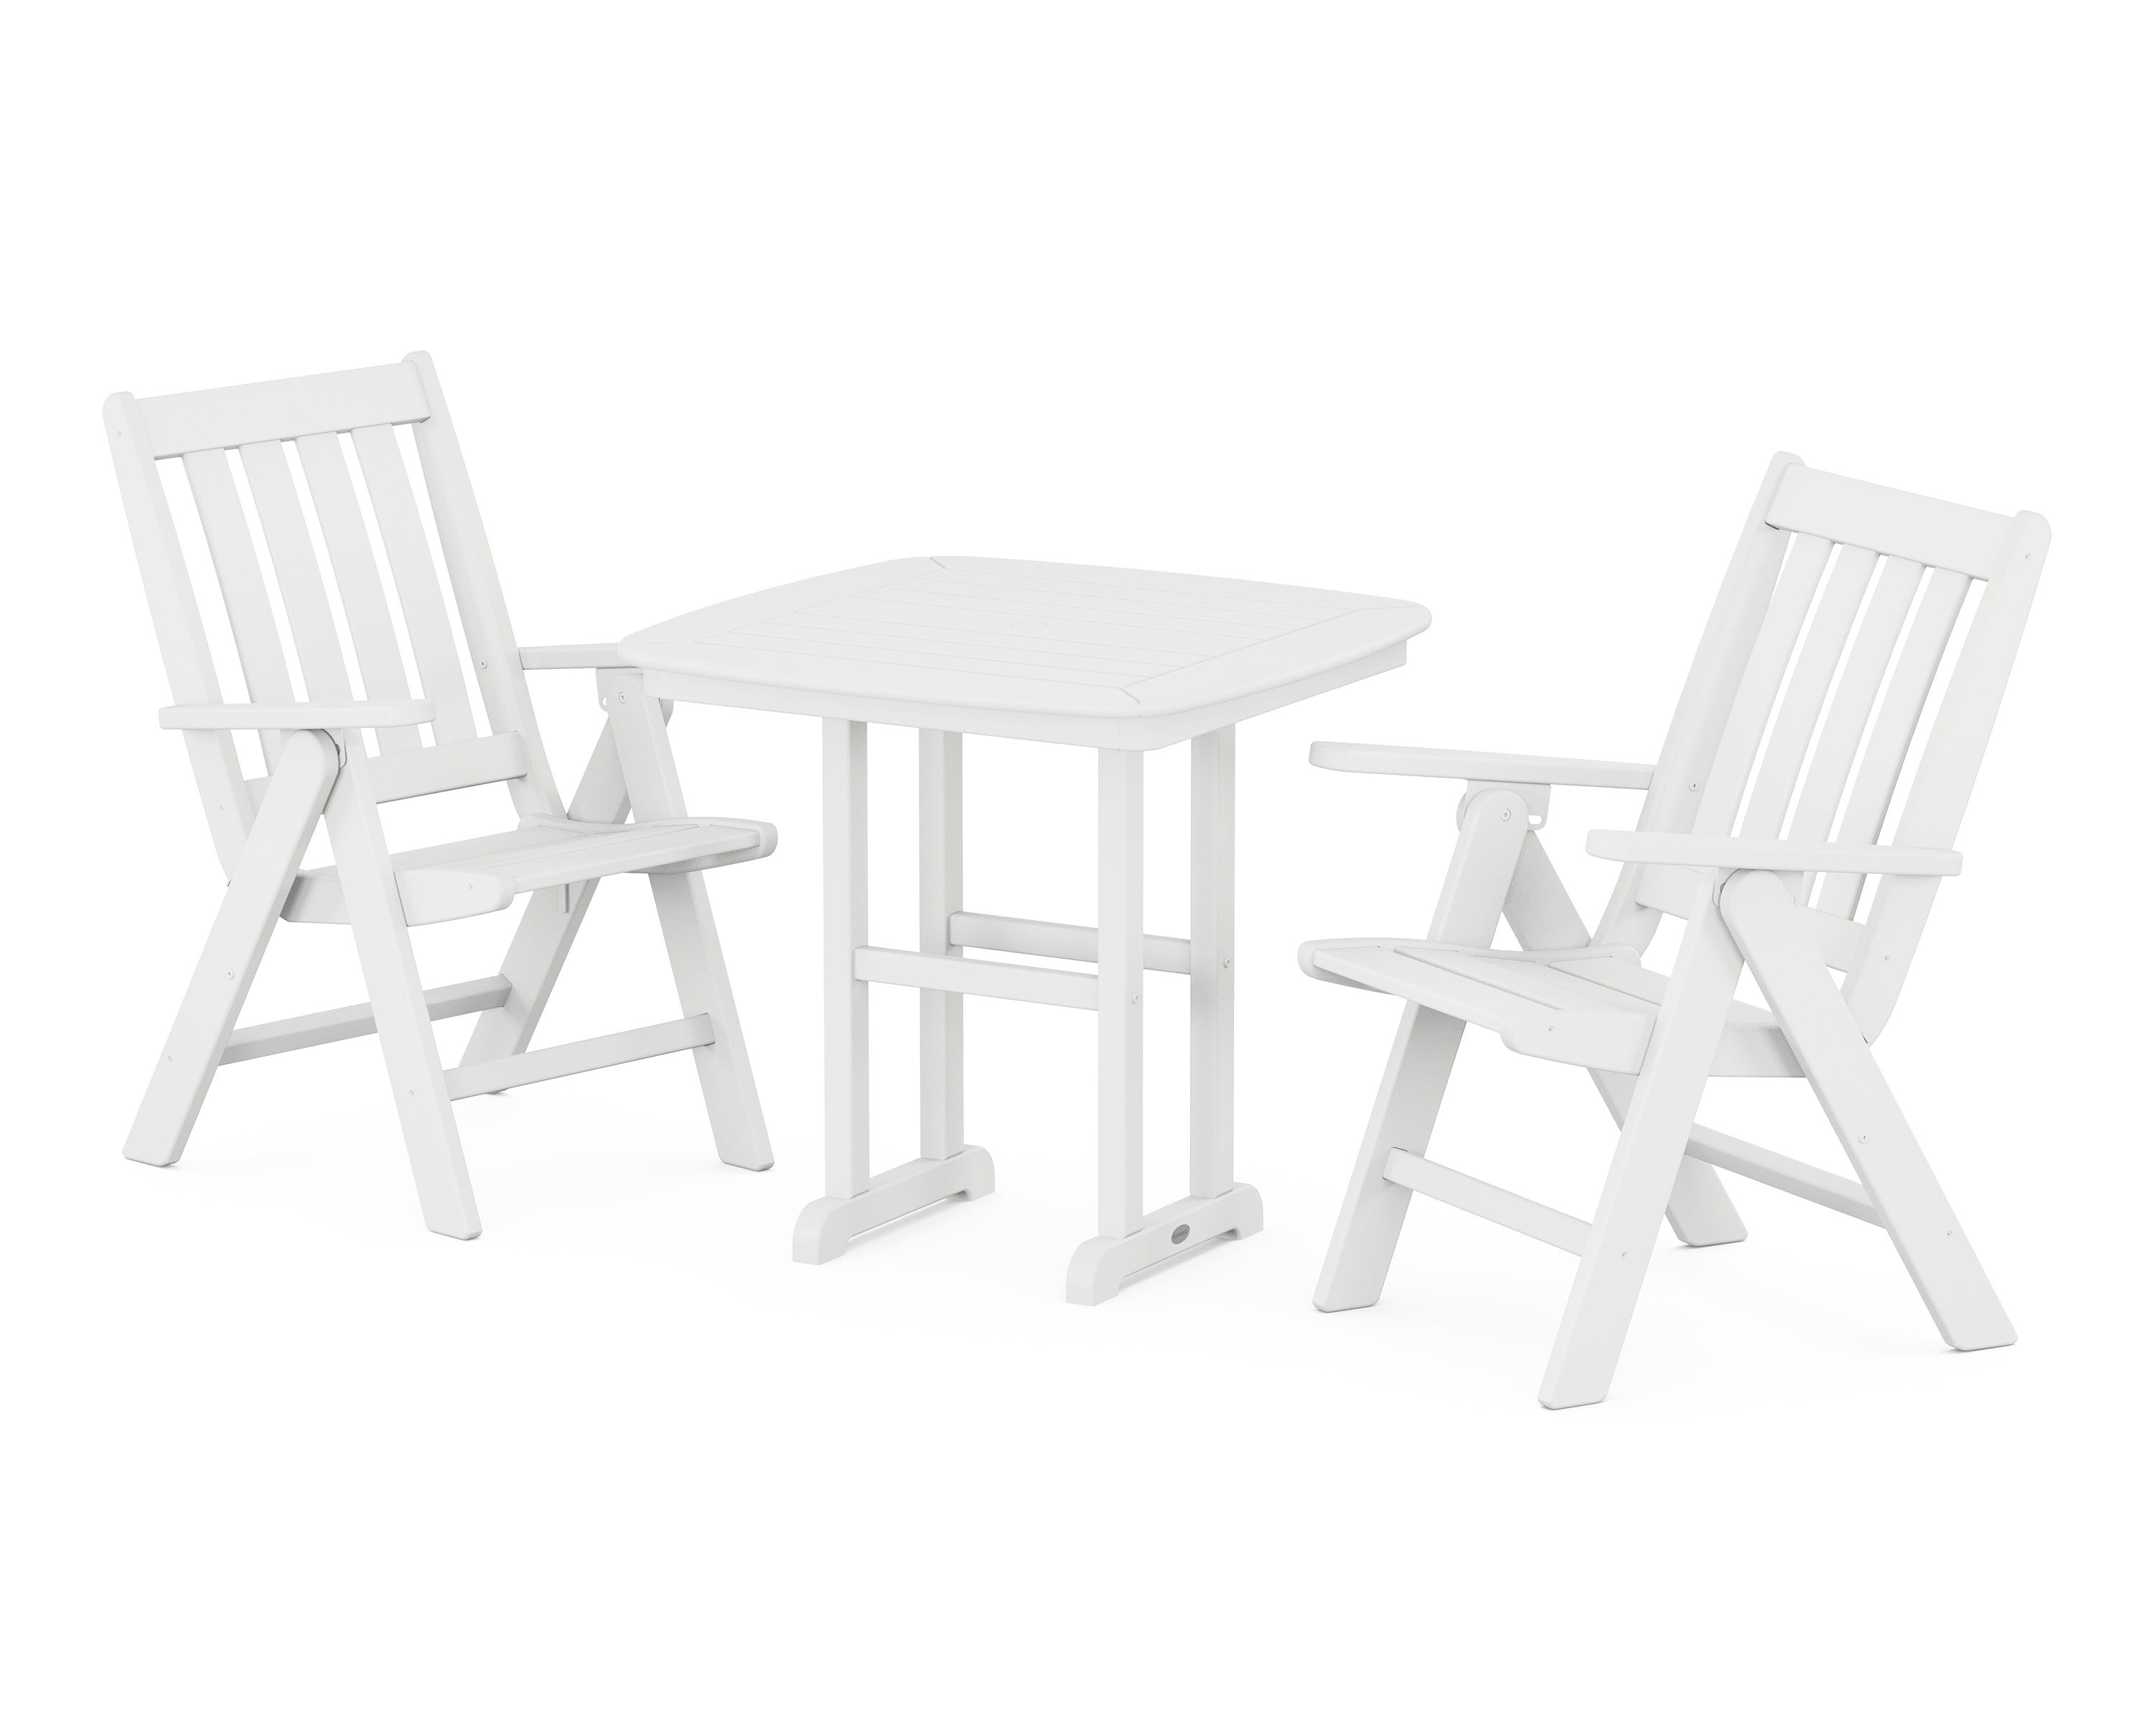 POLYWOOD® Vineyard Folding Chair 3-Piece Dining Set in White